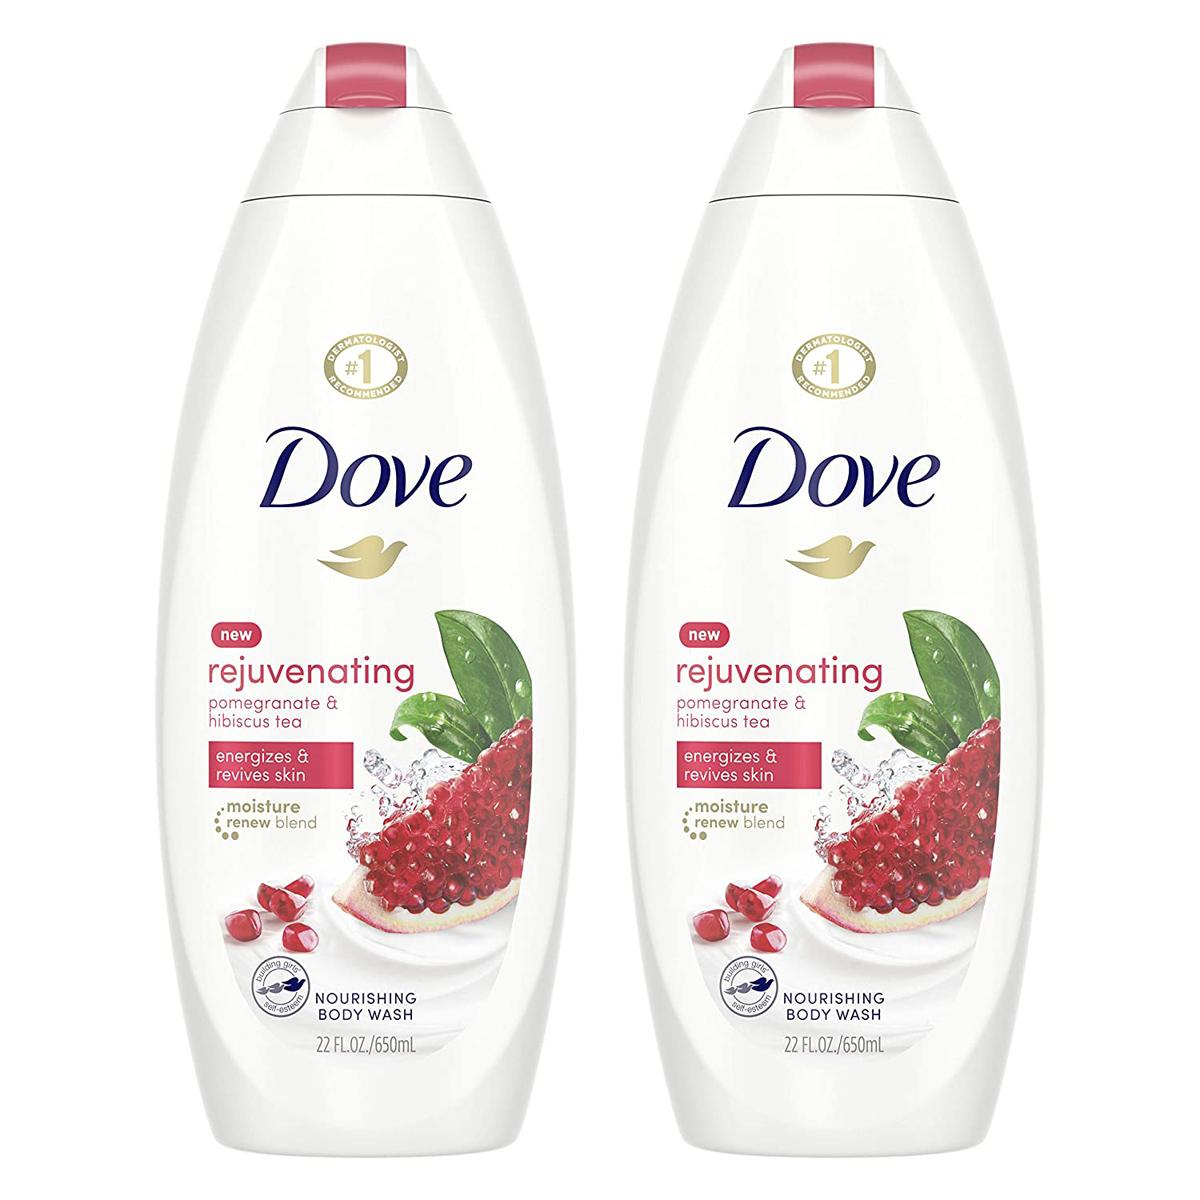 2 Dove Rejuvenating Body Wash Energizes and Revives Skin for $8.23 Shipped